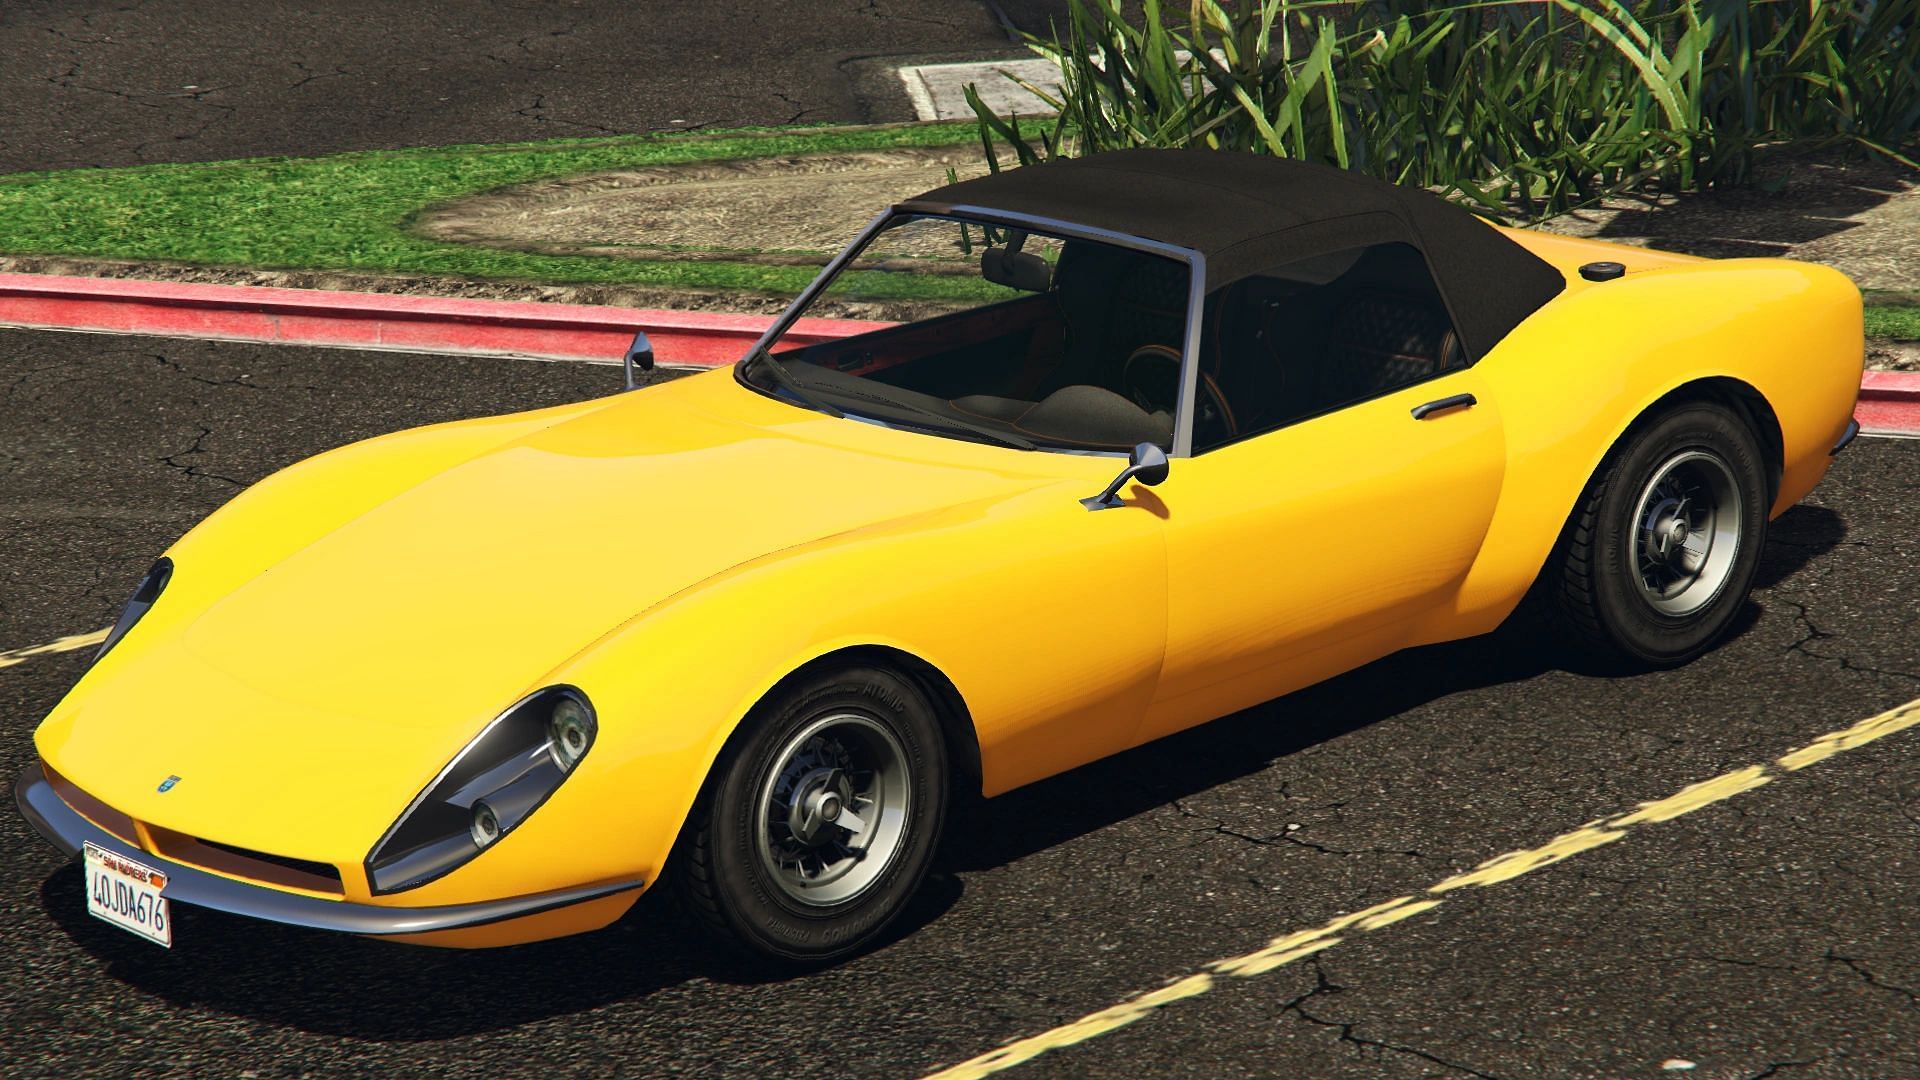 Stinger is one of the oldest GTA Online cars and should now become free (Image via Rockstar Games || GTA Wiki)